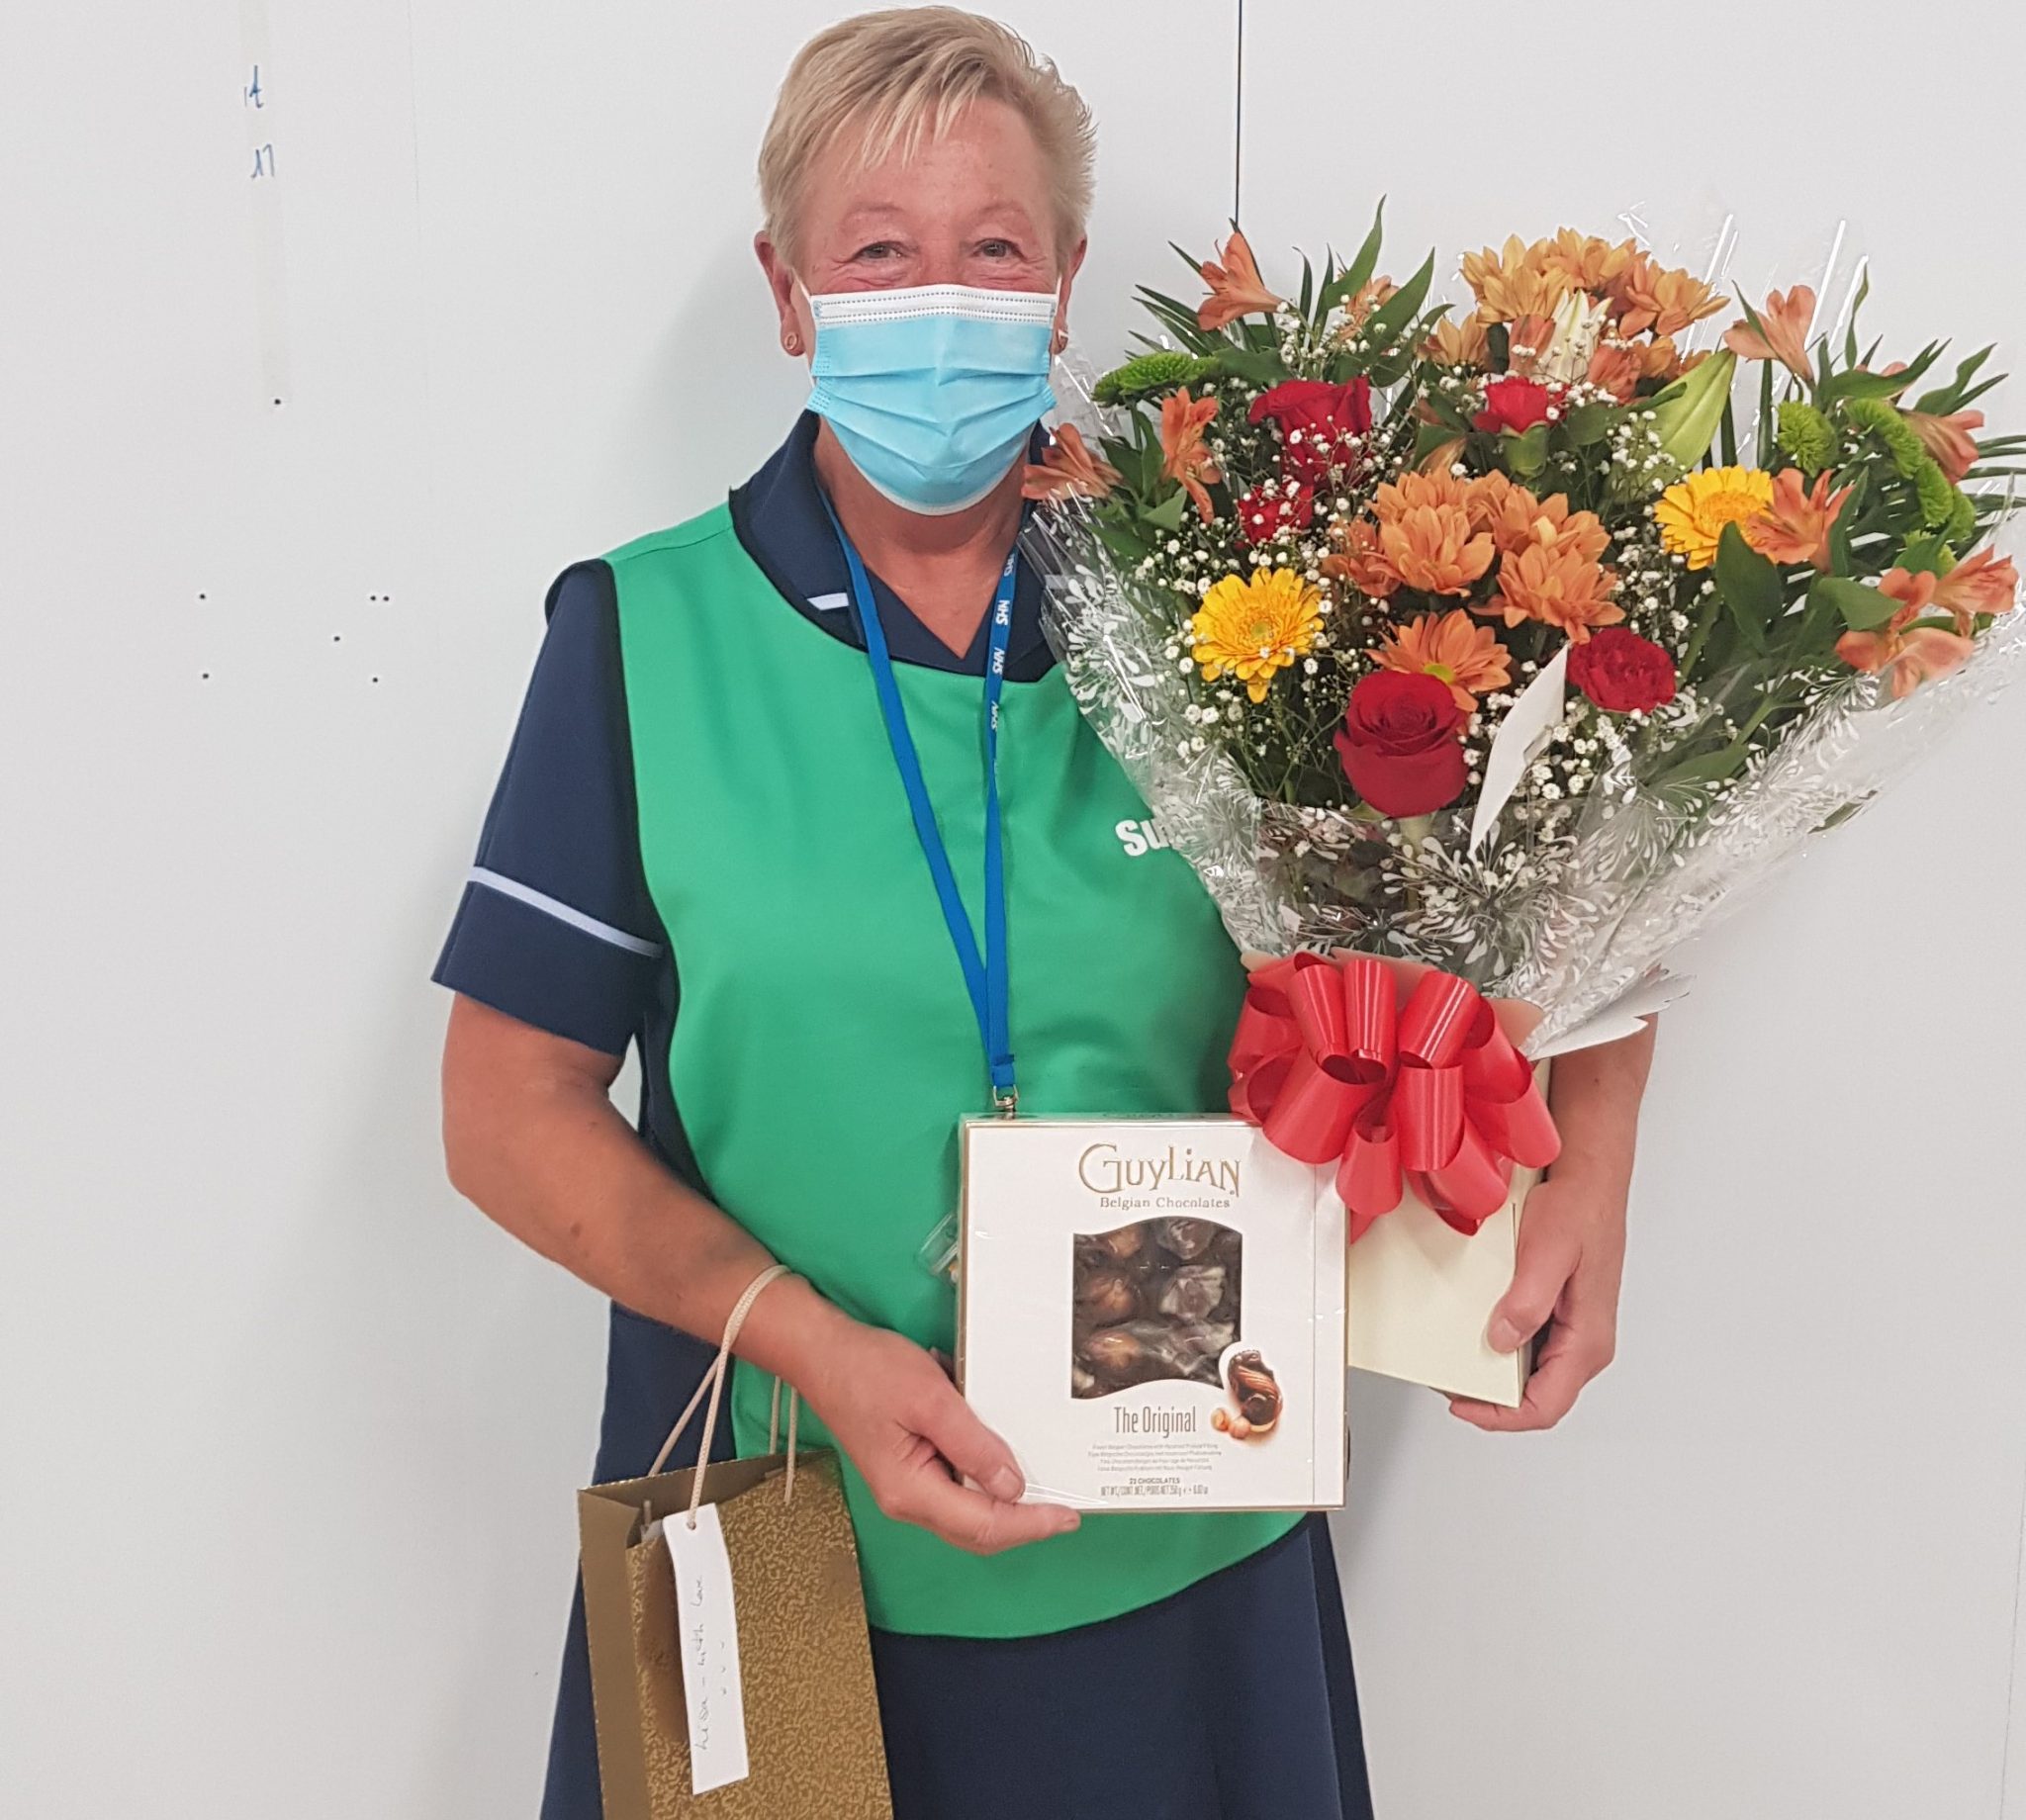 Lisa Hamilton has served the NHS for 50 years